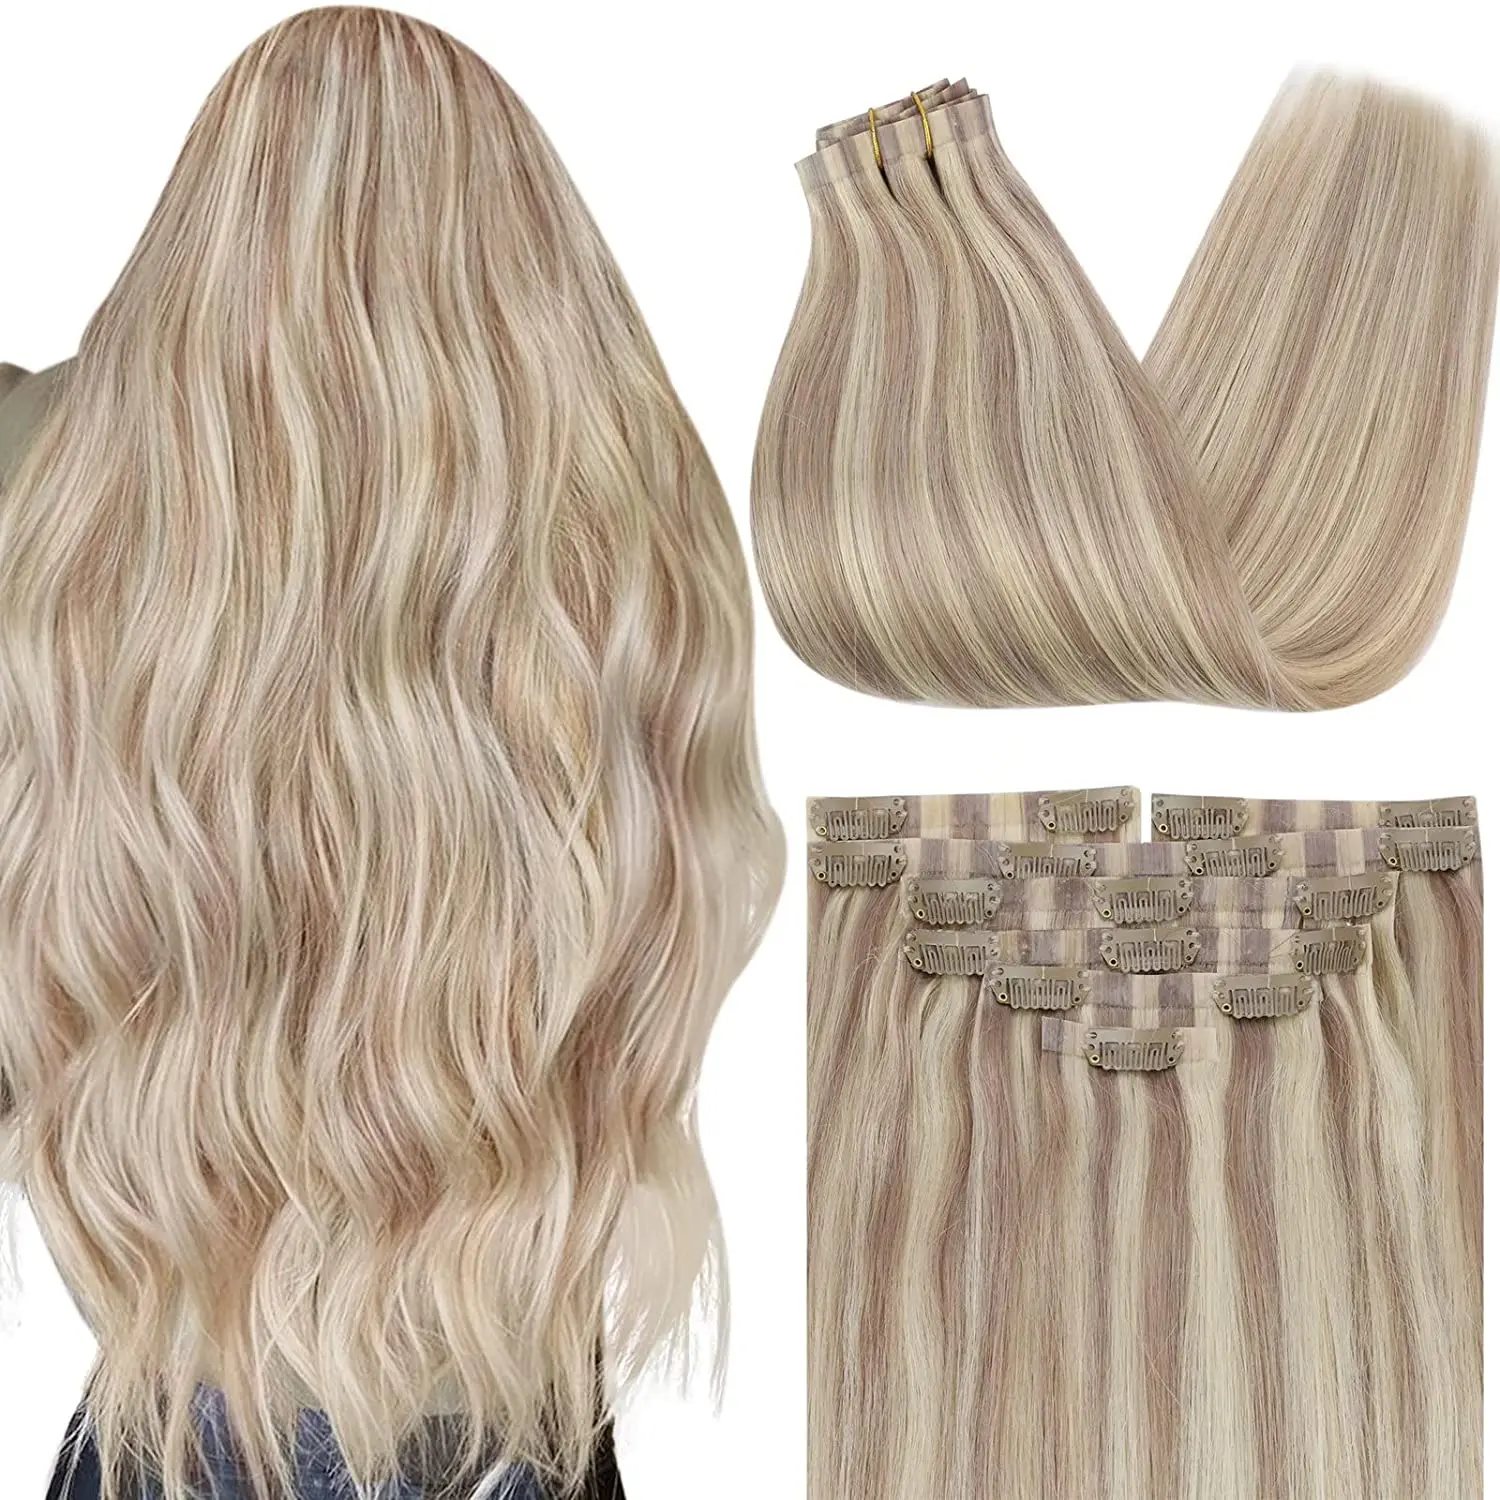 Vesunny Seamless Clip in Human Hair Extensions 130g 100% Real Pu Clip On Hair Extensions Remy Brazilian Hair 7Pcs/Set Full Head